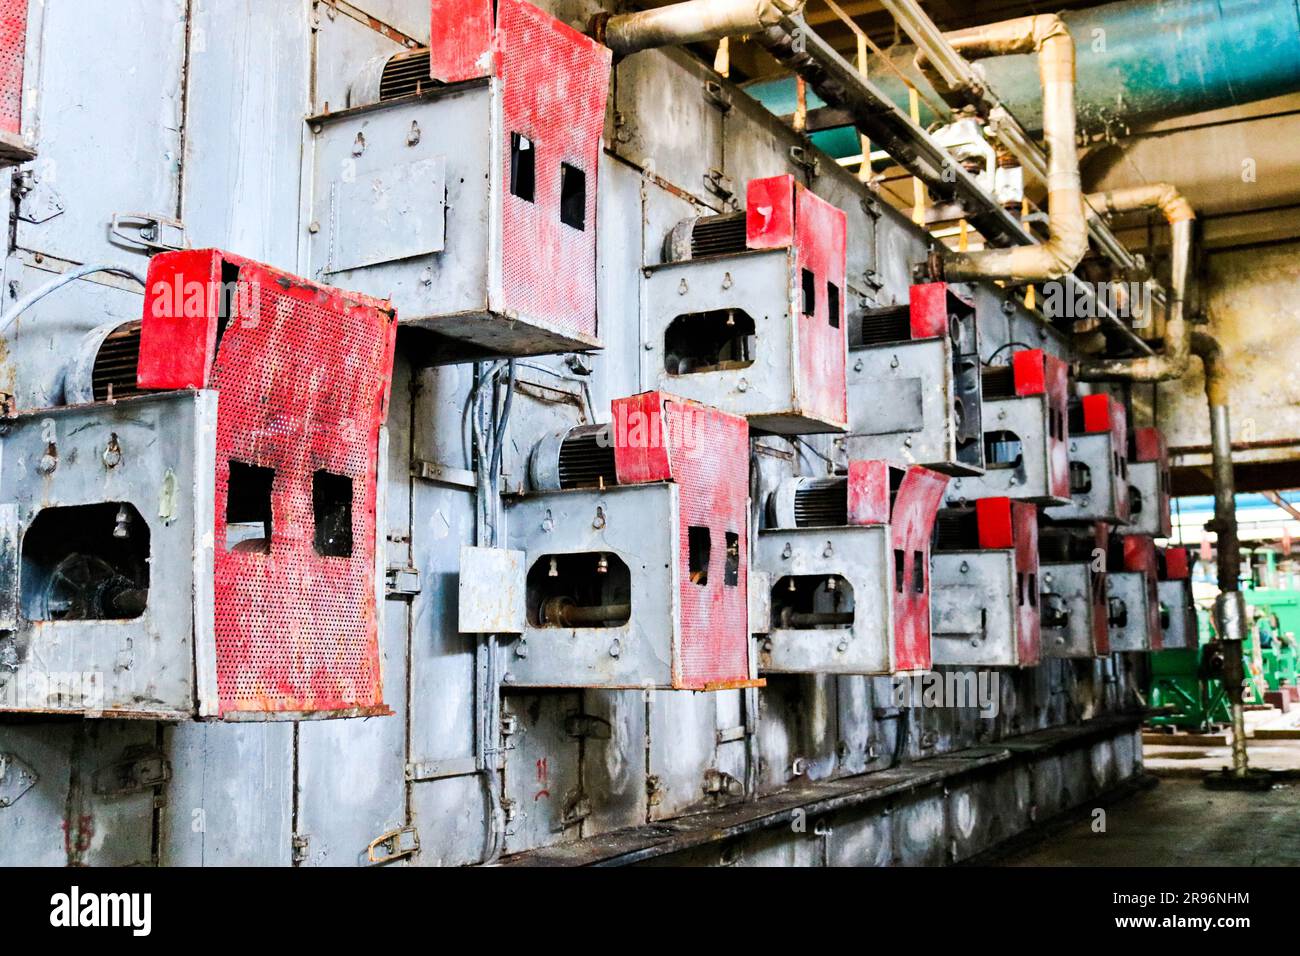 Iron metal red cabinets for perforated electric grid equipment located on a wall at an industrial petrochemical chemical refinery. Stock Photo